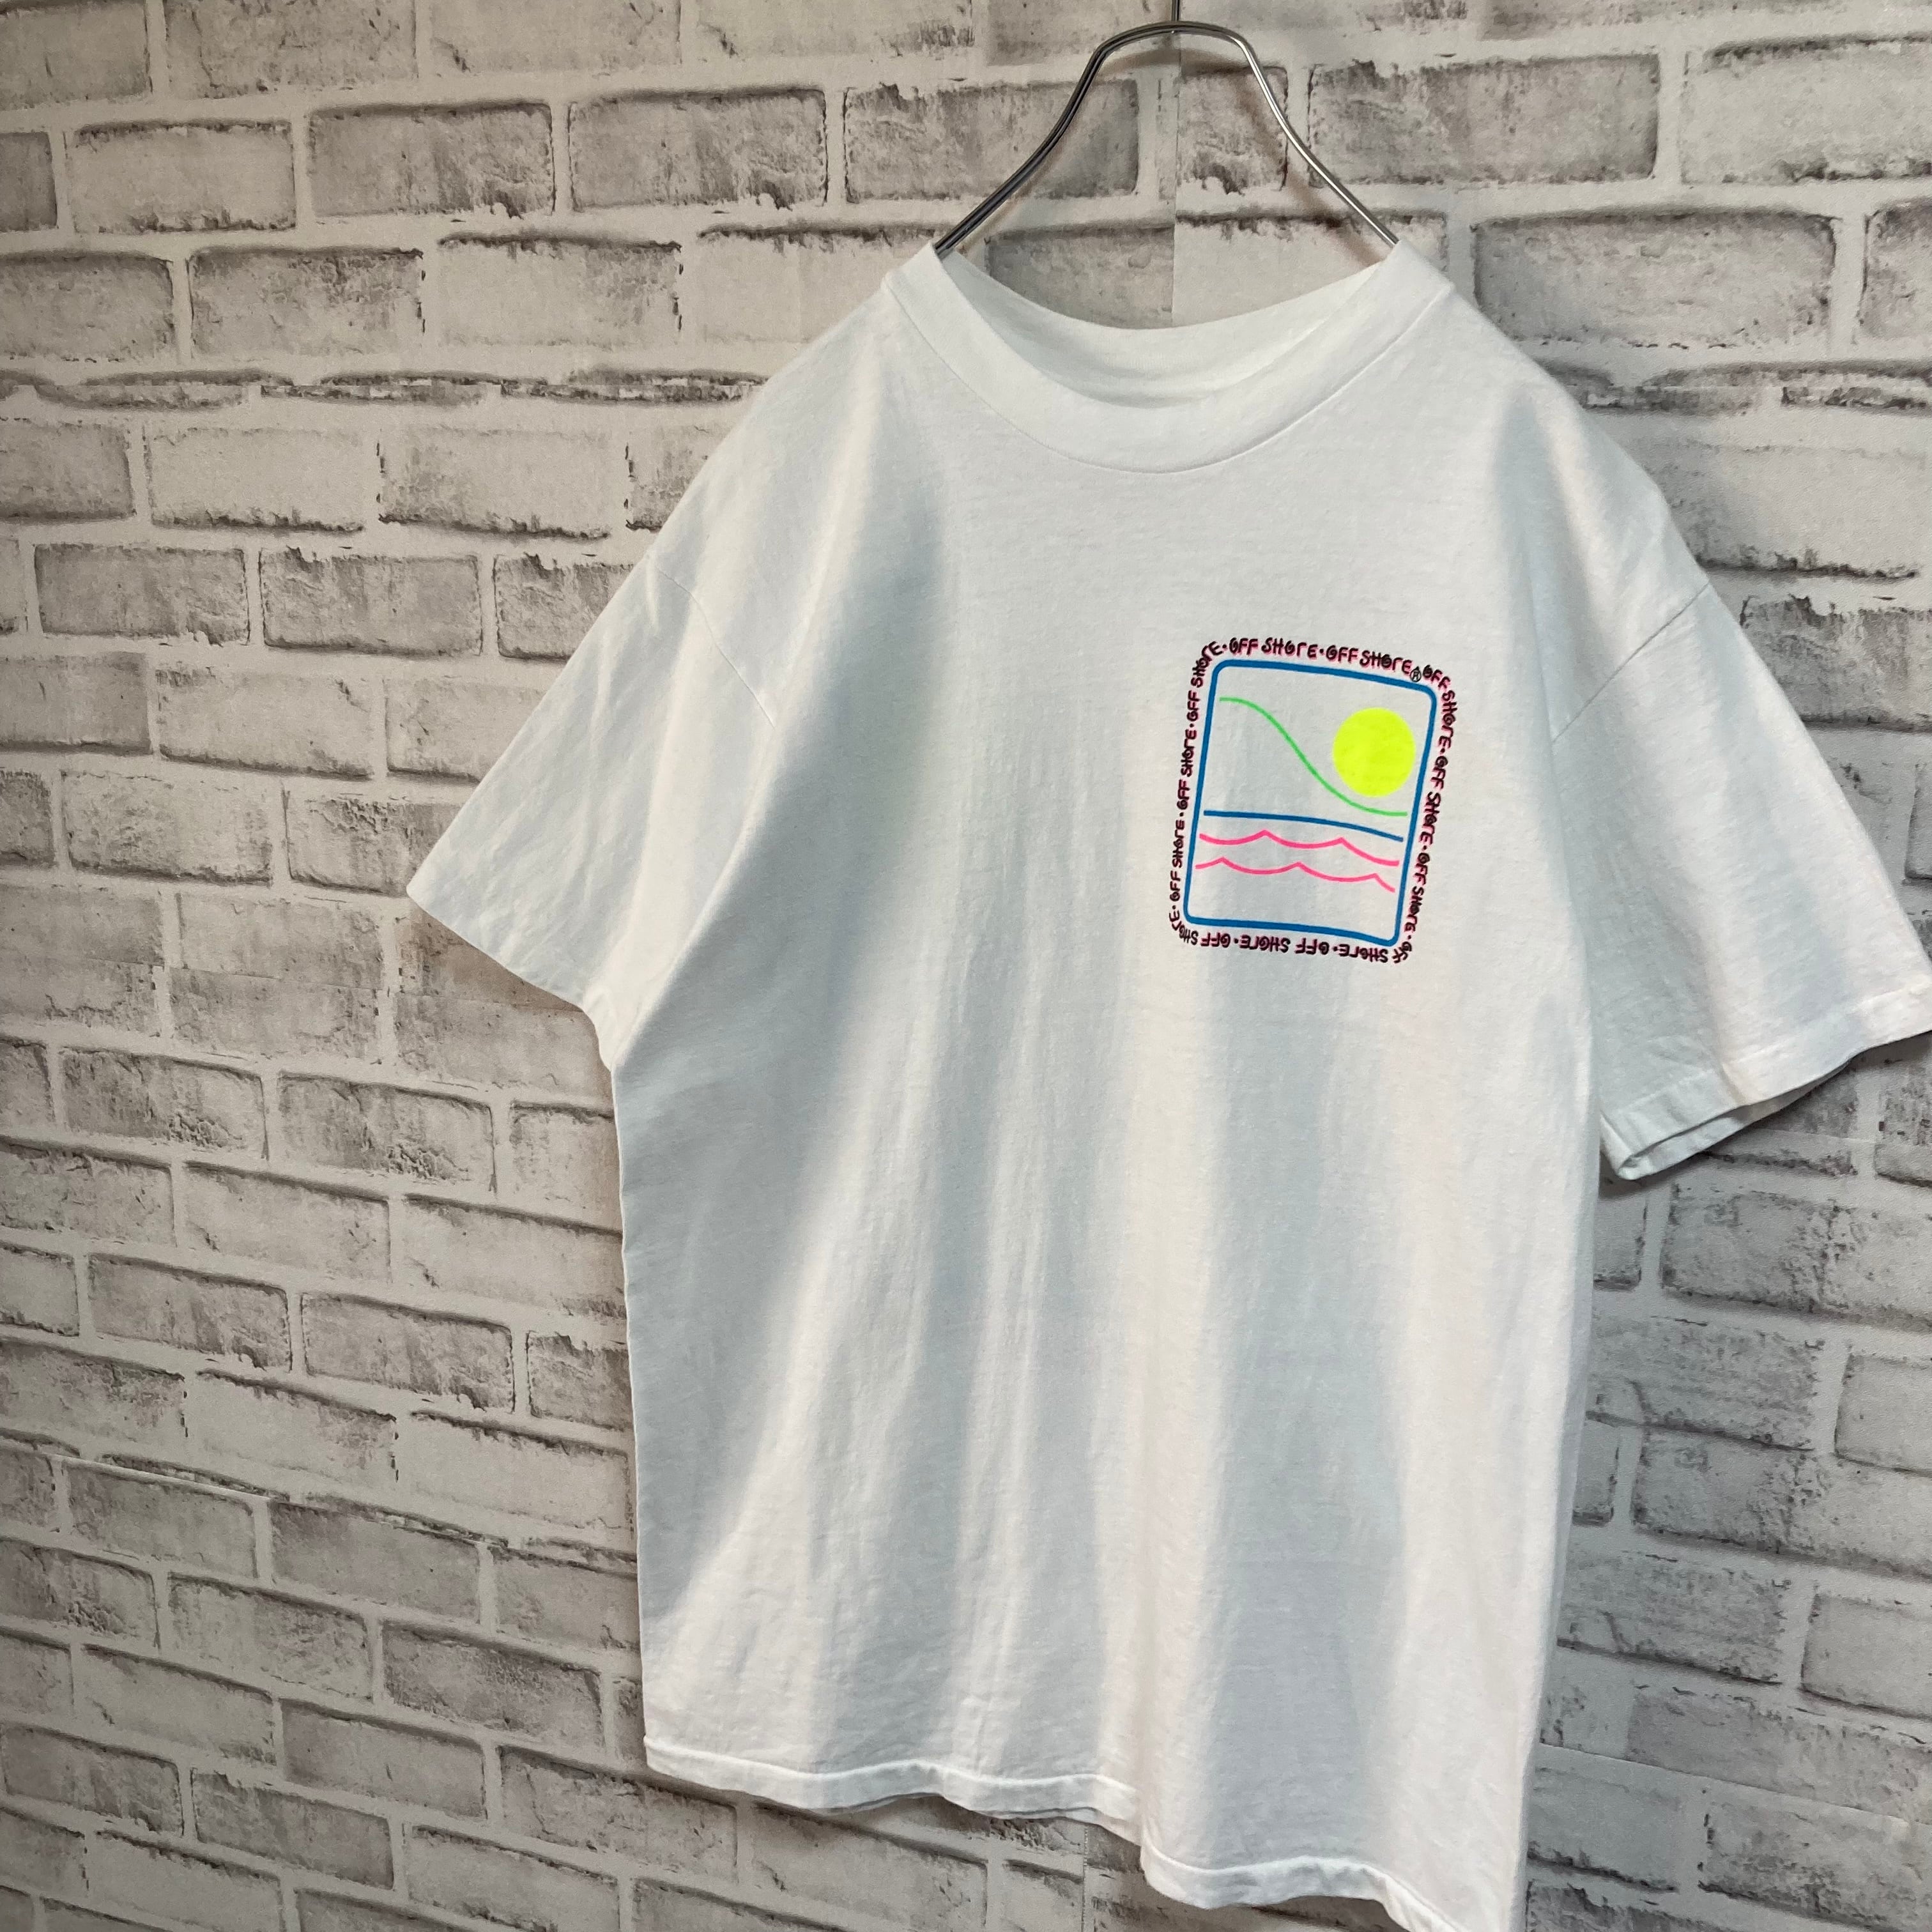 【Hanes】S/S Tee L Made in USA 80s vintage ヘインズ バック ...